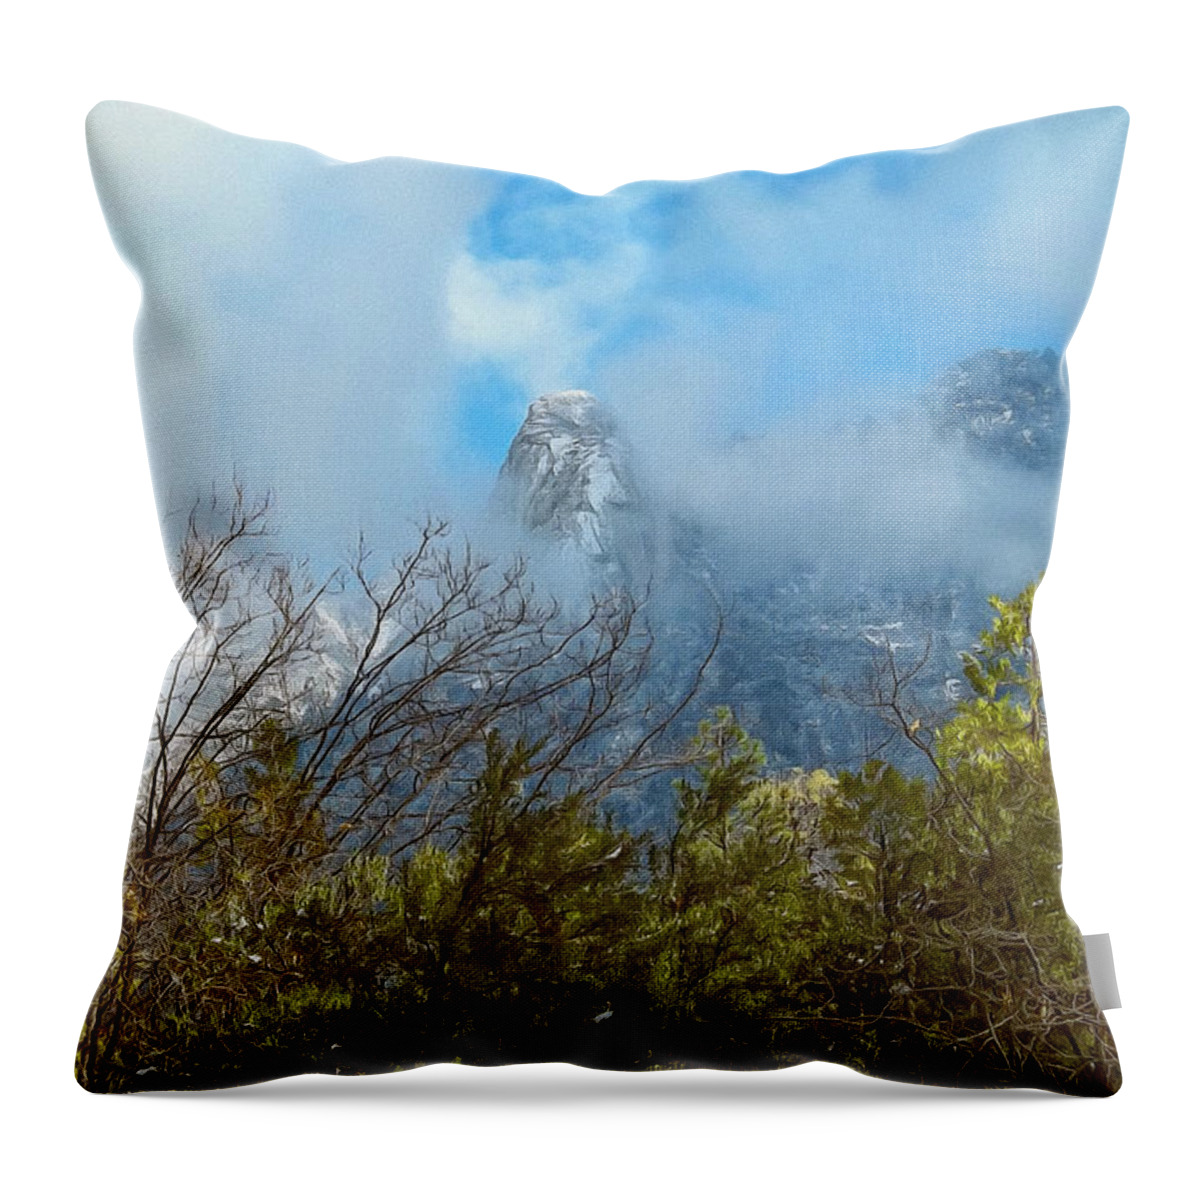 Glenn Mccarthy Throw Pillow featuring the photograph Out Of The Mist by Glenn McCarthy Art and Photography